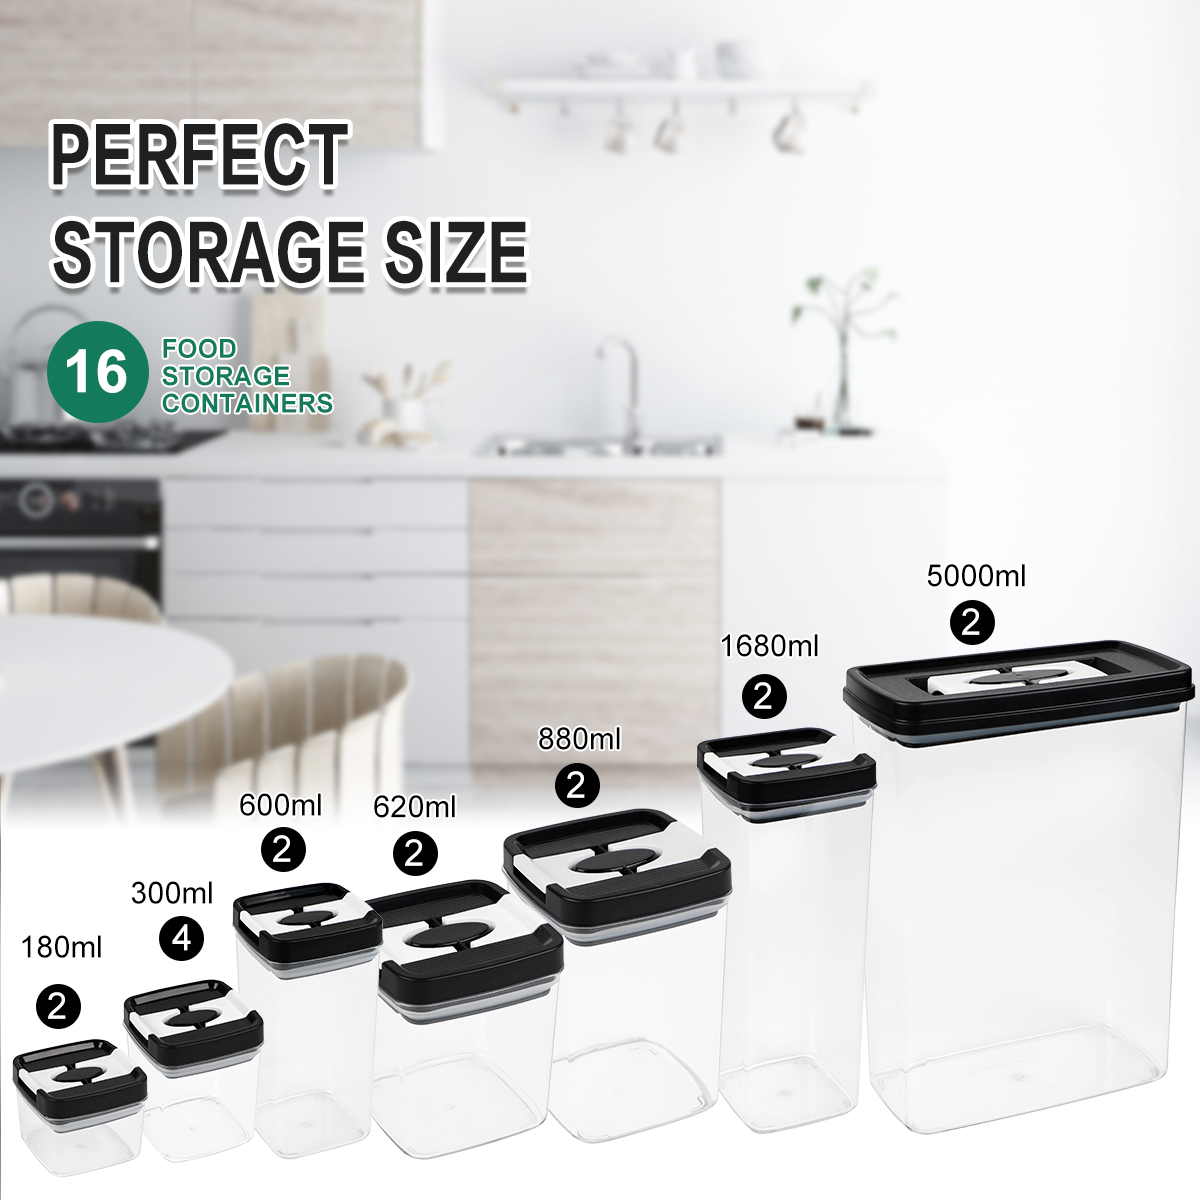 8 Pieces PET Airtight Food Storage Containers Set with Locking Lids Food Storage Containers Set Stackable